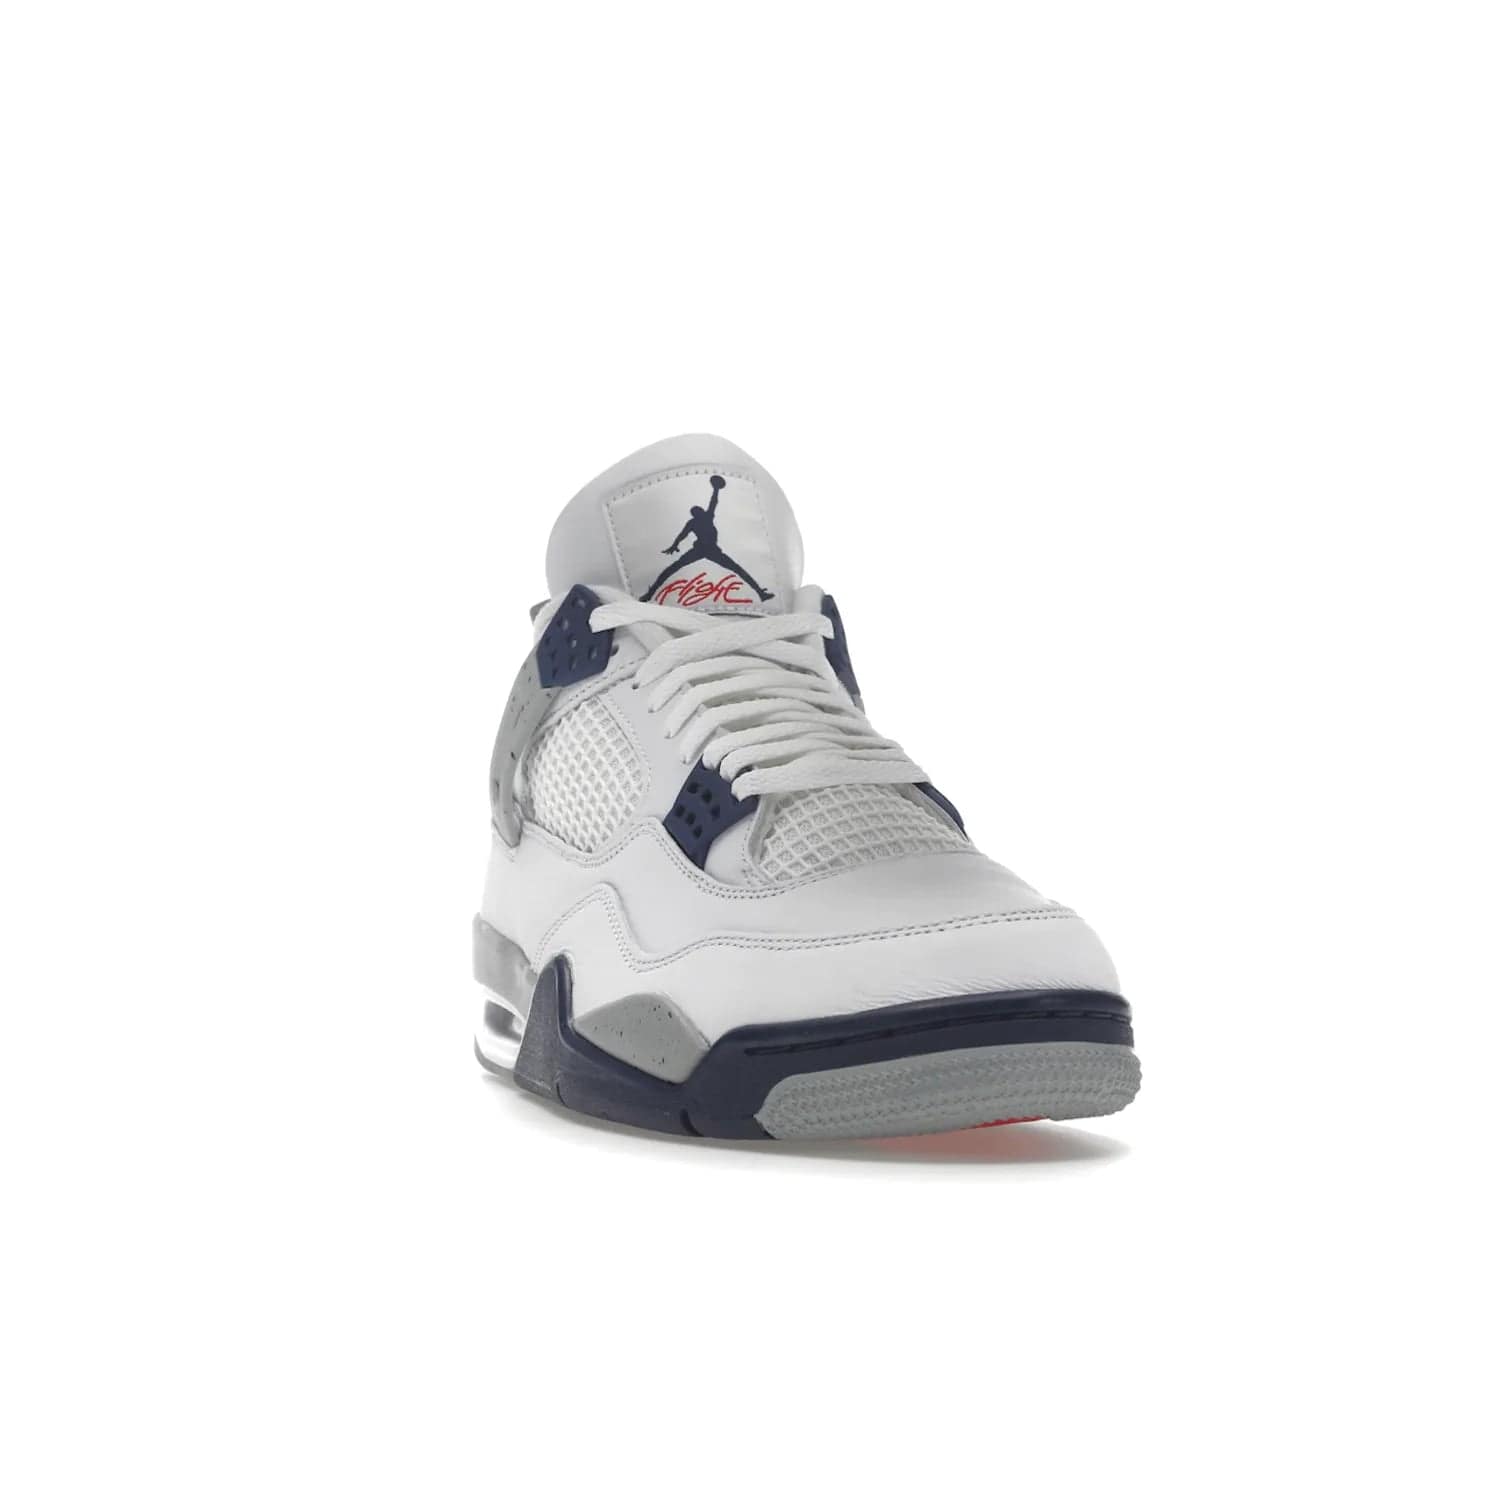 Jordan 4 Retro Midnight Navy - Image 8 - Only at www.BallersClubKickz.com - Shop the Air Jordan Retro 4 White Midnight Navy. Stand out with a classic white leather upper, black support wings, midnight navy eyelets, and Crimson Jumpman tongue tag. Unbeatable comfort with two-tone polyurethane midsole with encapsulated Air technology. Get yours before October 29th, 2022.